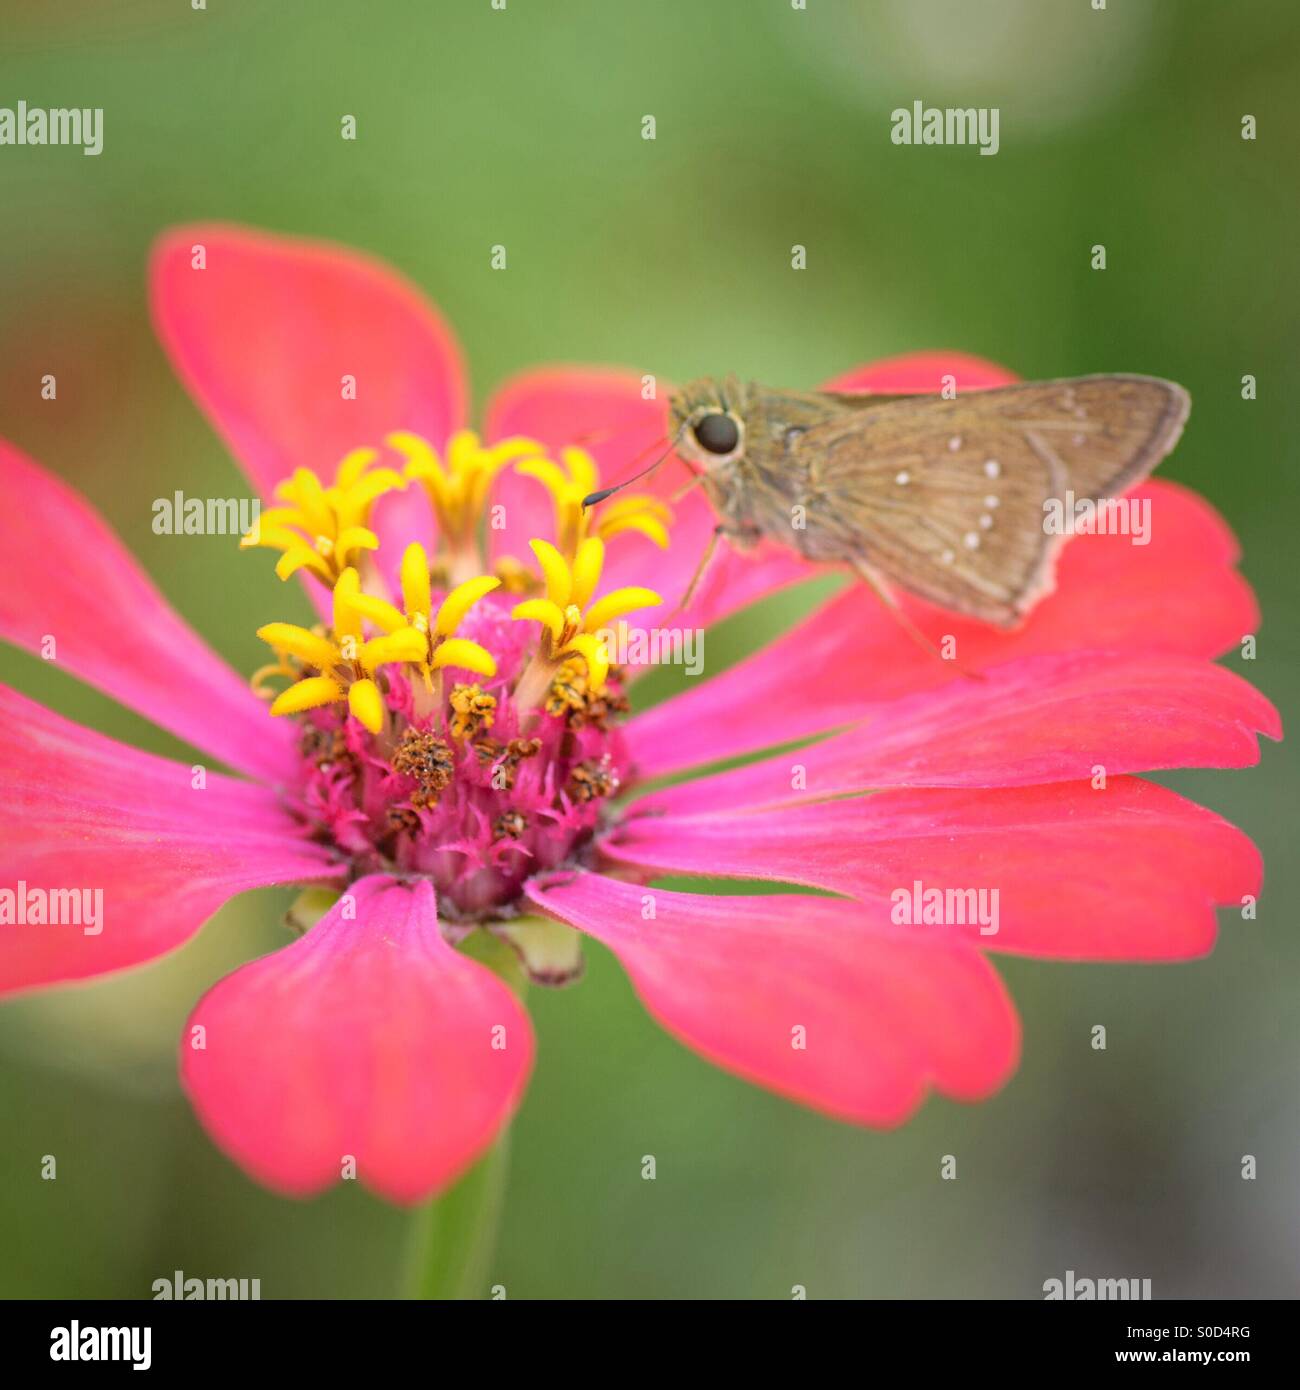 A flower and brown butterfly Stock Photo